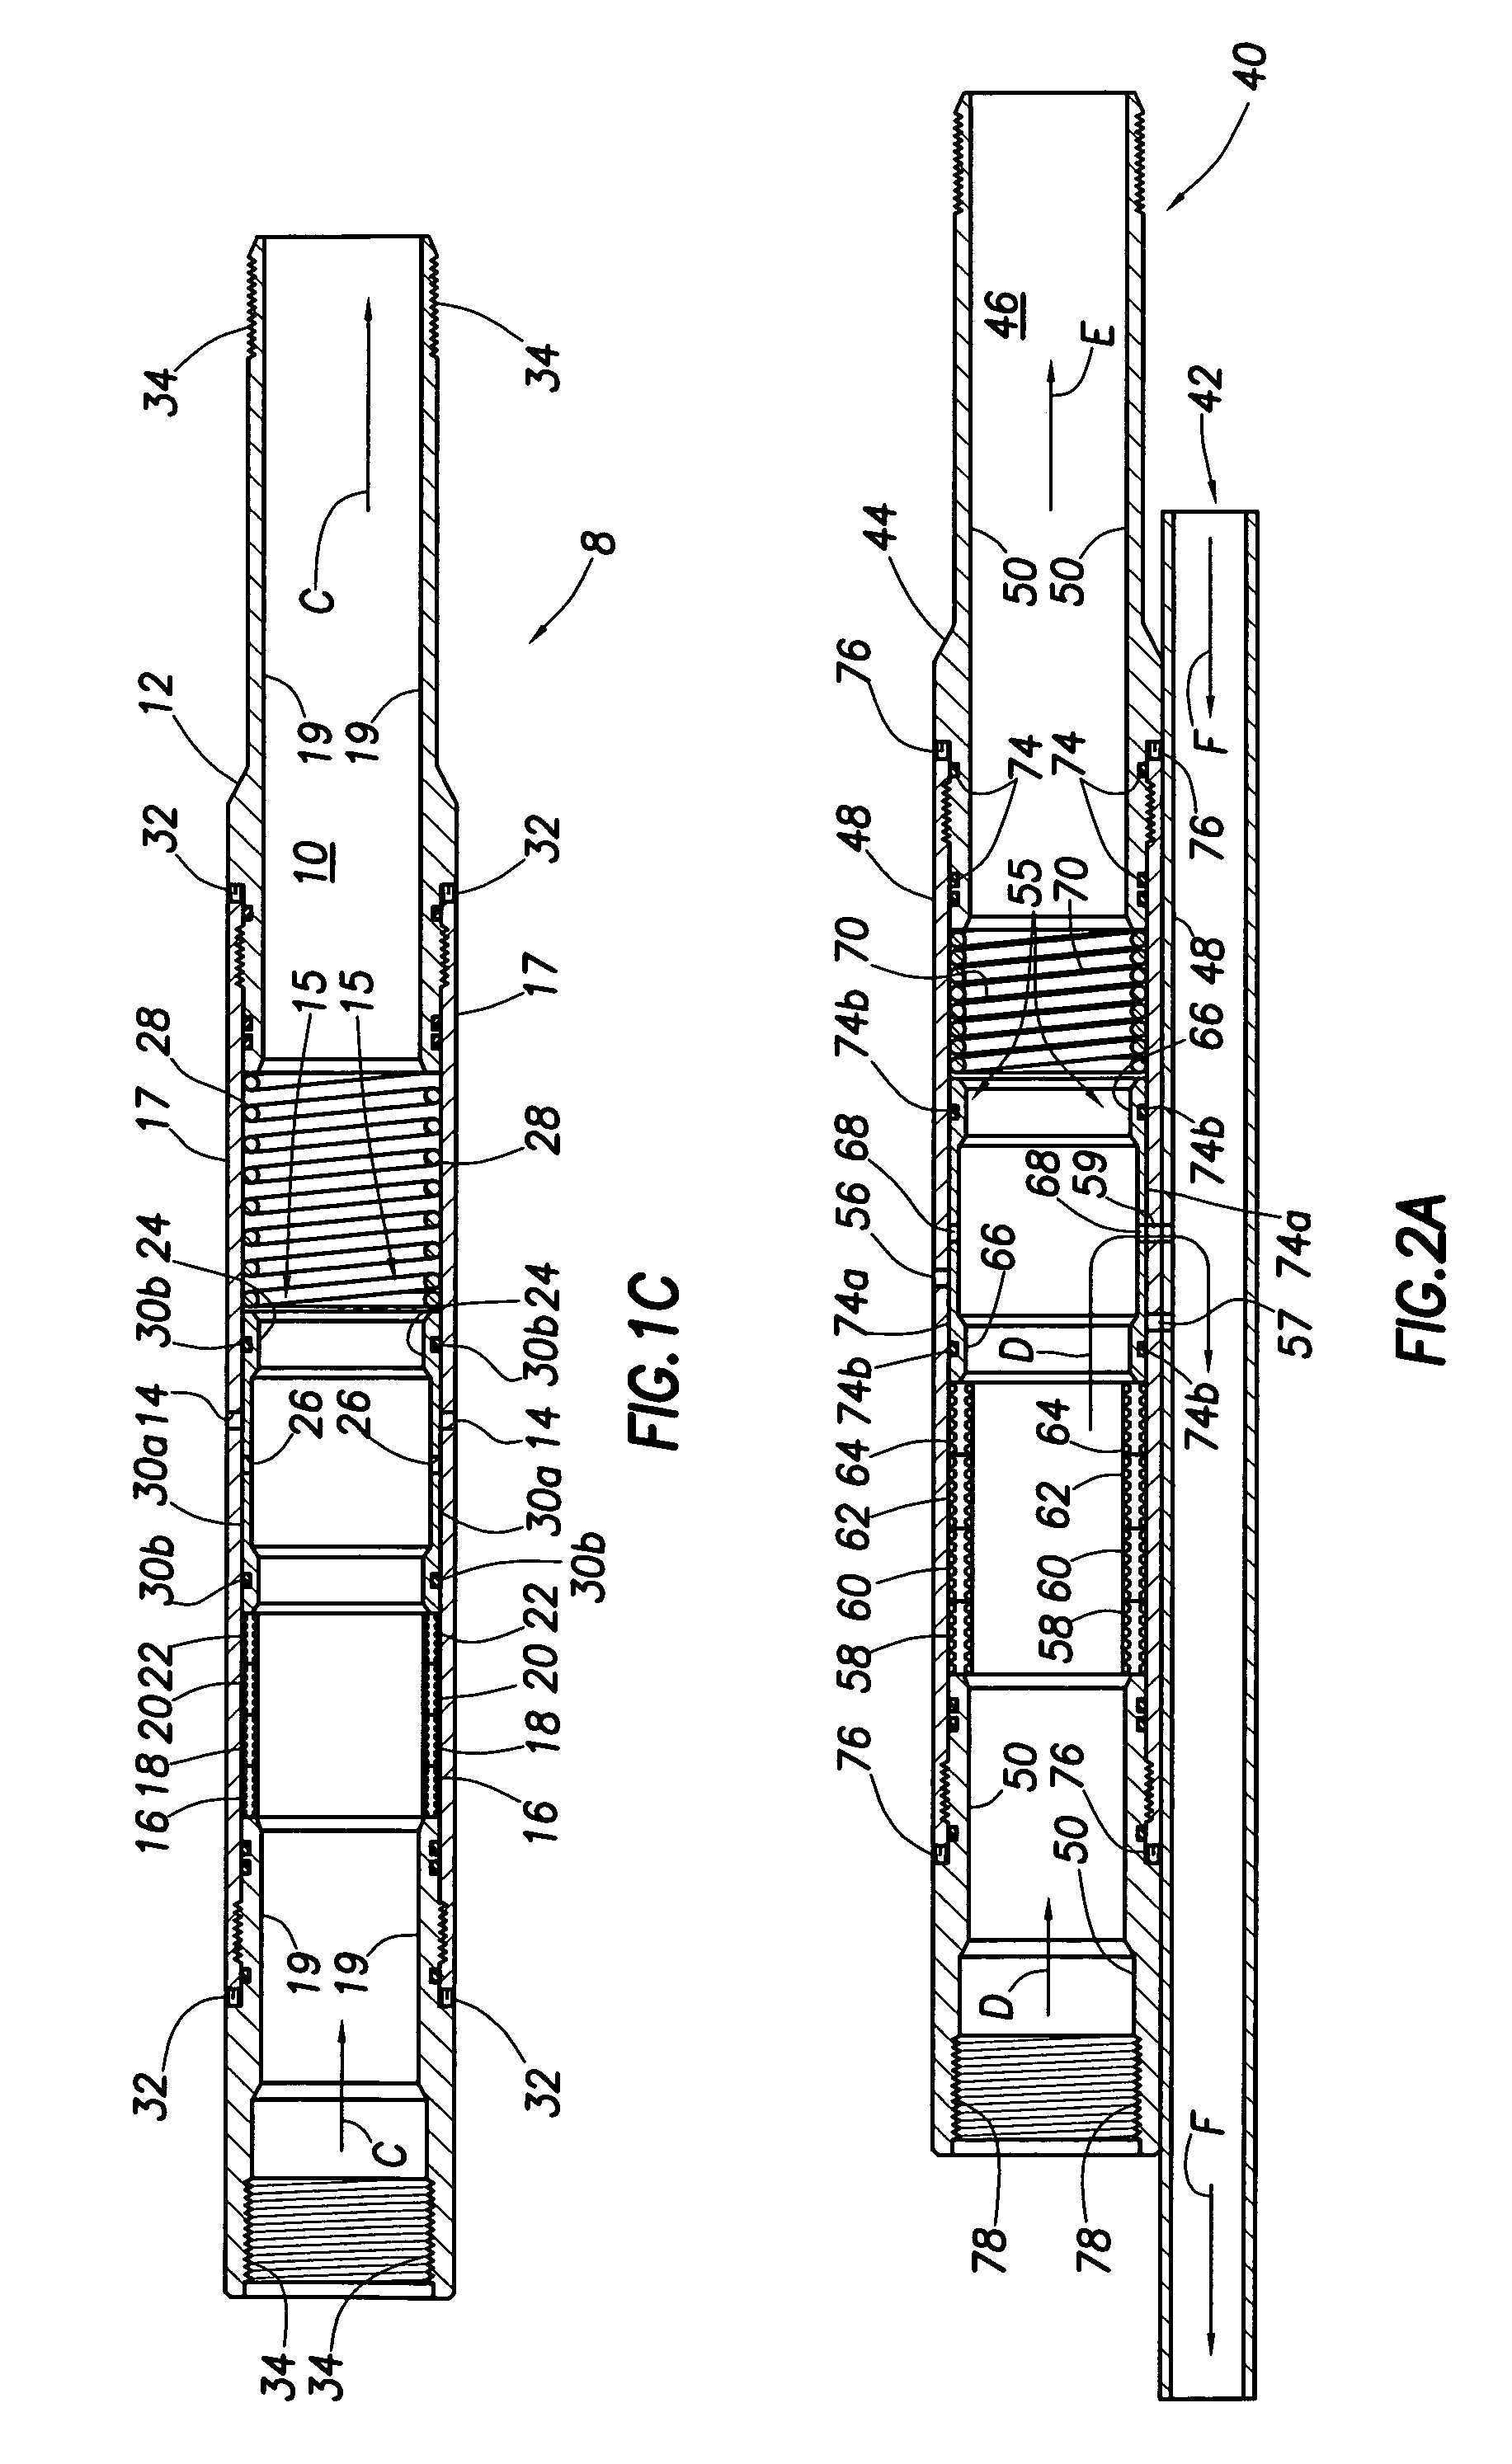 Thermally-controlled valves and methods of using the same in a wellbore